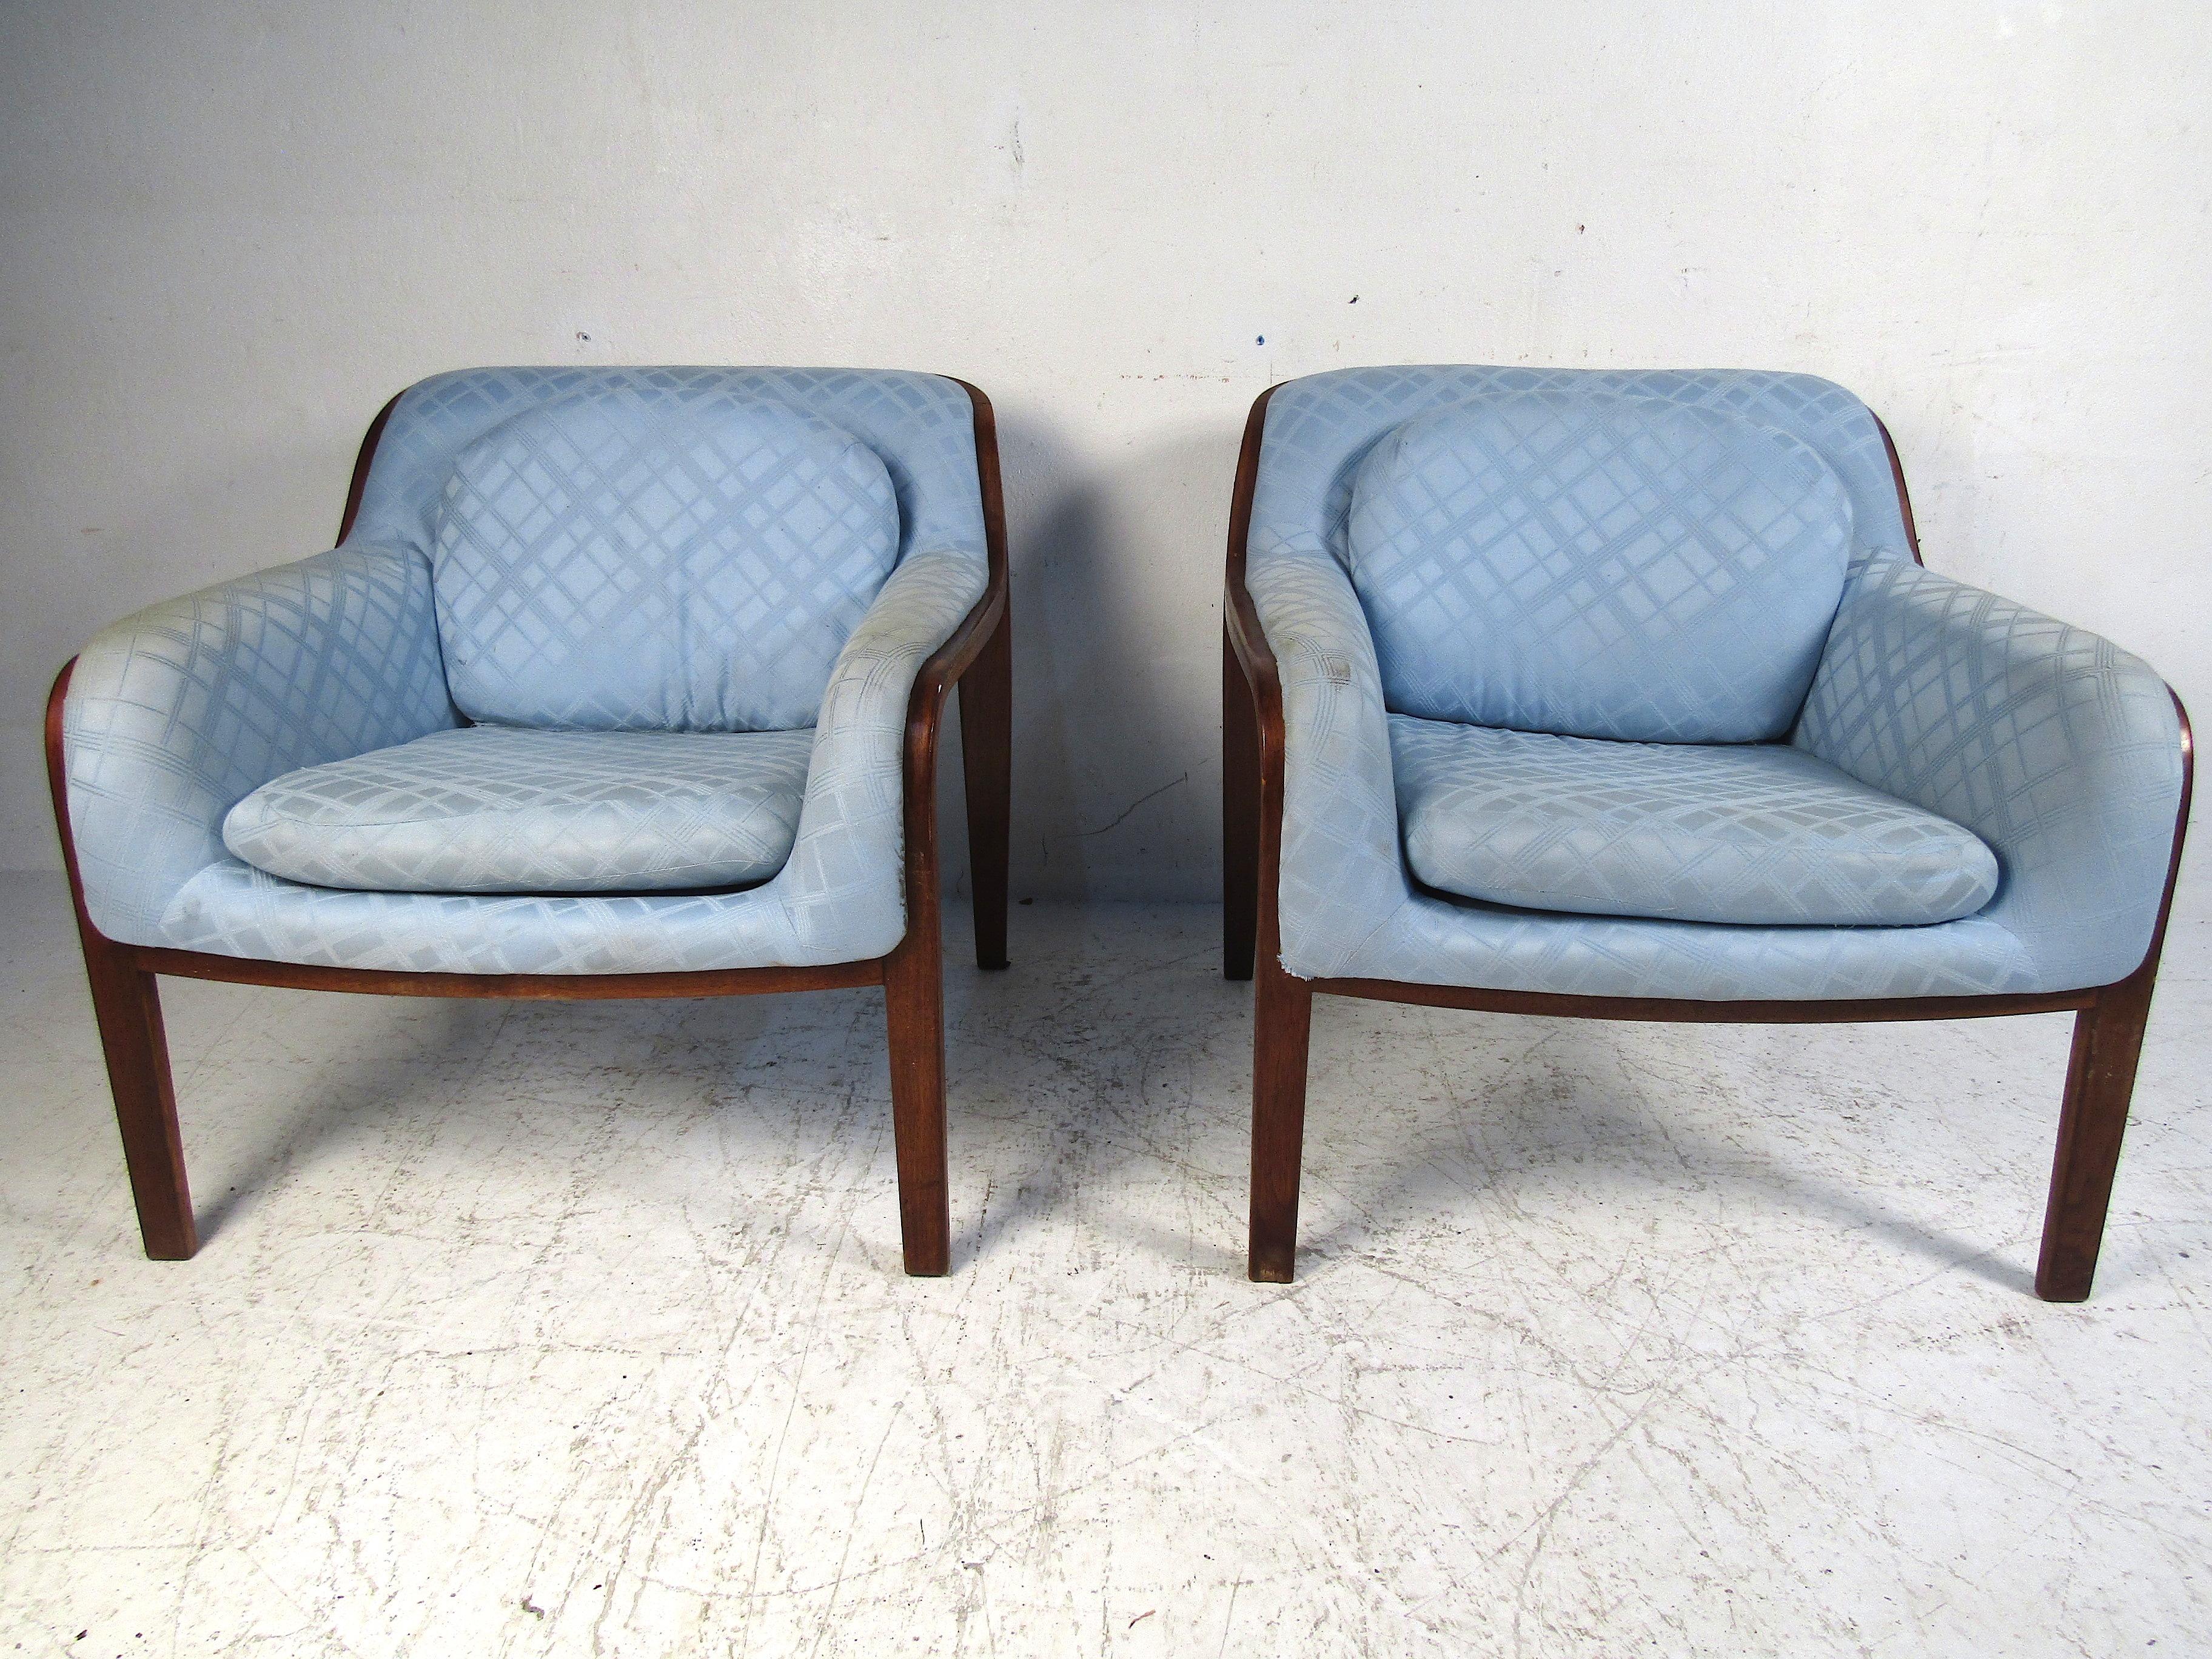 Stylish pair of midcentury bentwood lounge chairs. Covered in a vintage light blue upholstery. Designed by Bill Stephens for Knoll. This pair is sure to be a great addition to any modern interior. Please confirm item location with dealer (NJ or NY).